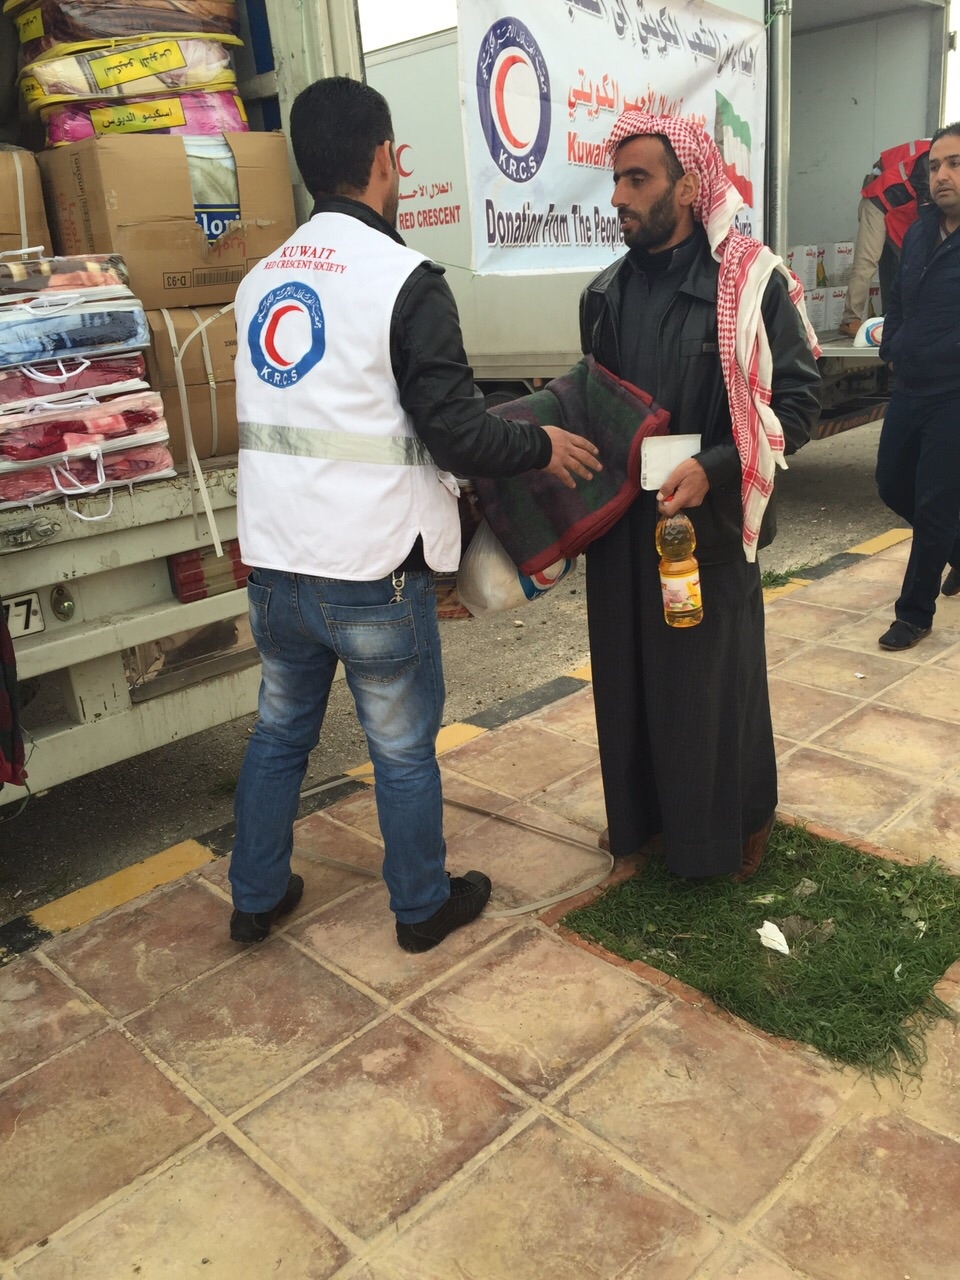 The Kuwait Red Crescent Society distributes aid to 400 Syrian refugees in Jordanimage